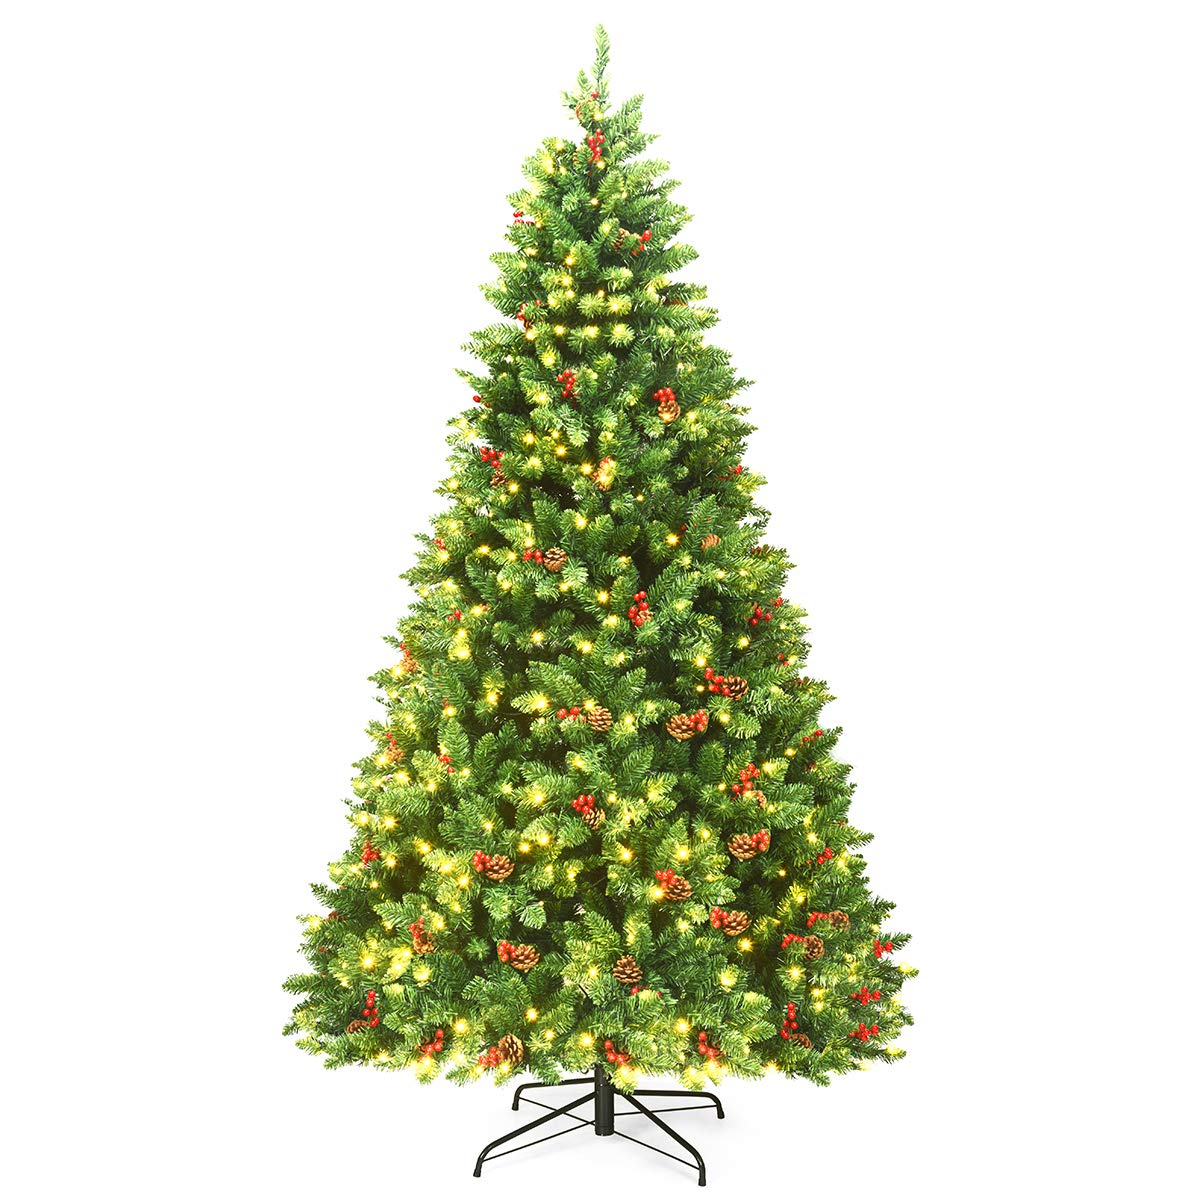 Goplus 7.5FT Pre-Lit Christmas Tree with 550 LED Lights, Hinged Artificial Christmas Tree with 1526 Branch Tips - GoplusUS